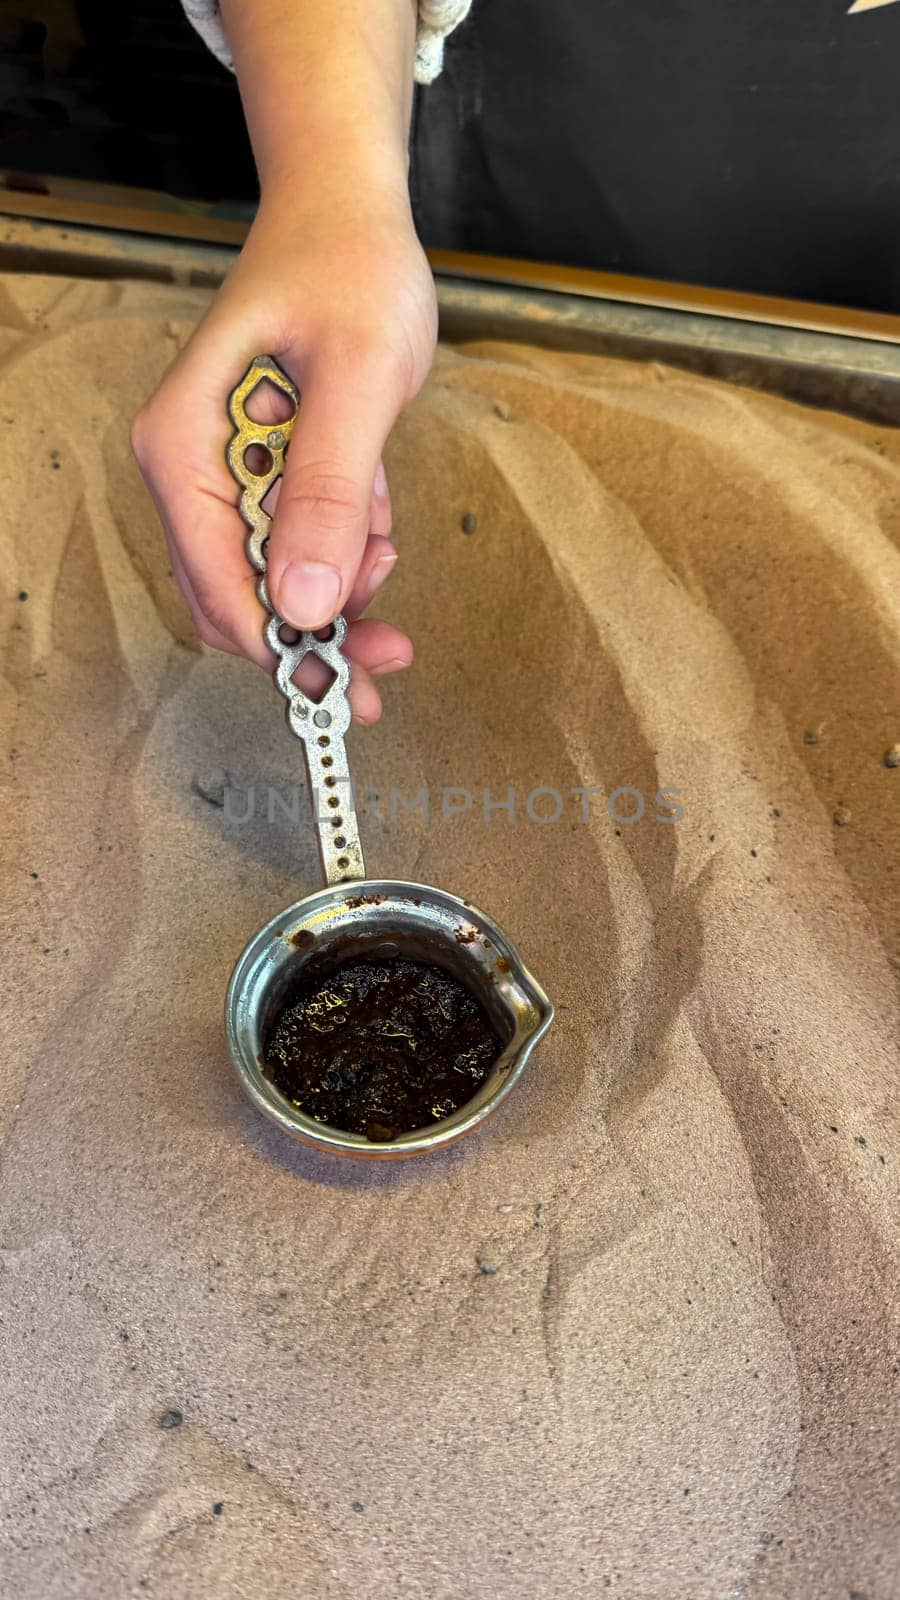 Hand holding traditional copper cezve with brewed Turkish coffee over sand, with coffee grounds visible and shadows playing on the sand. Turkish coffee making tradition. by Lunnica